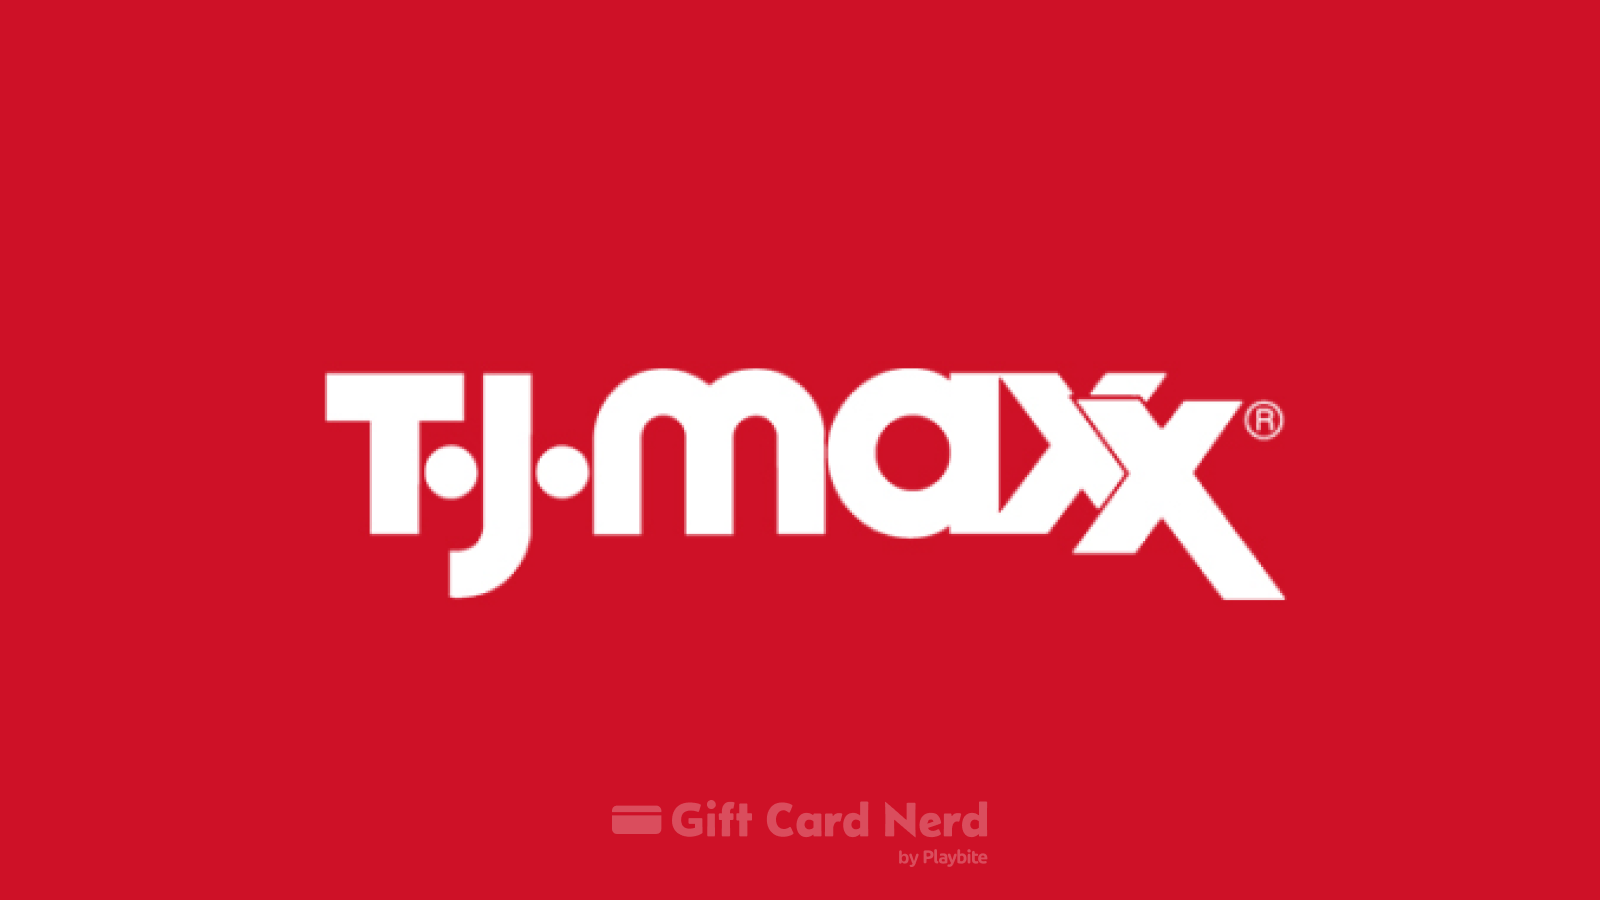 Does Walgreens Sell TJ Maxx Gift Cards?